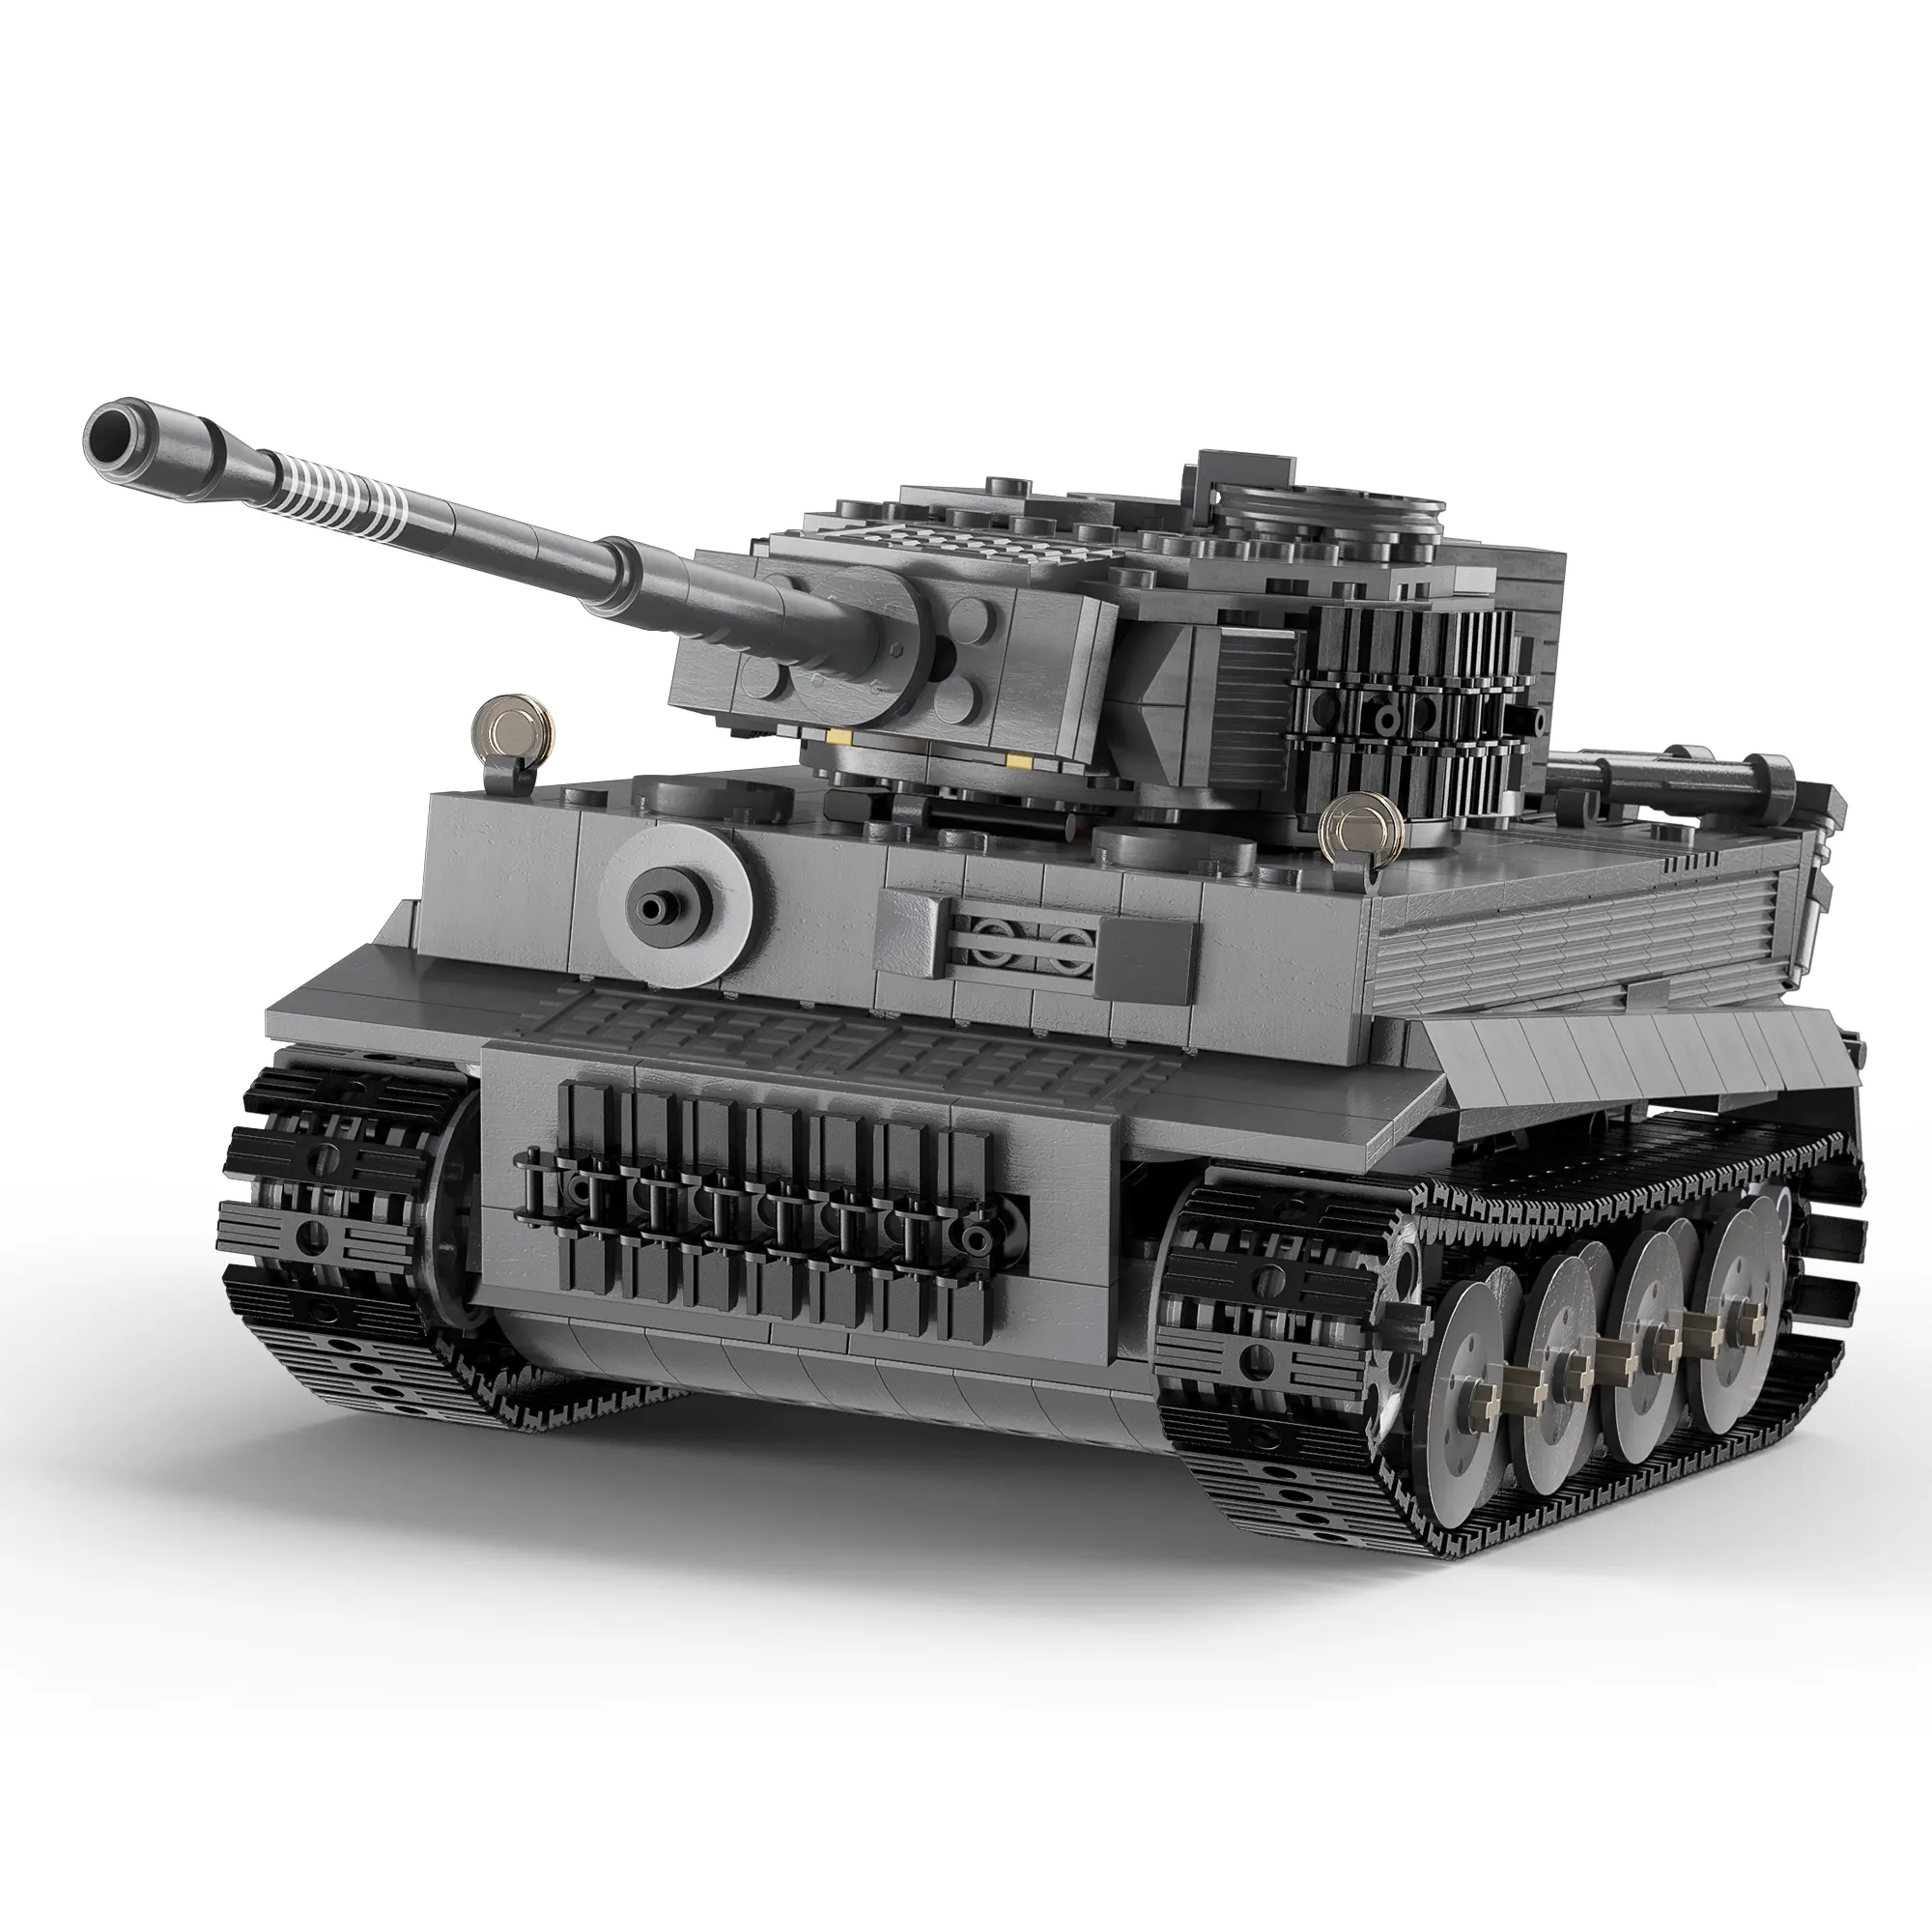 C61071 MOC Building Blocks Military and Engineering Toy, Adult Collectible Tank Model Kit to Build, Boy Toys for Christmas Gifts